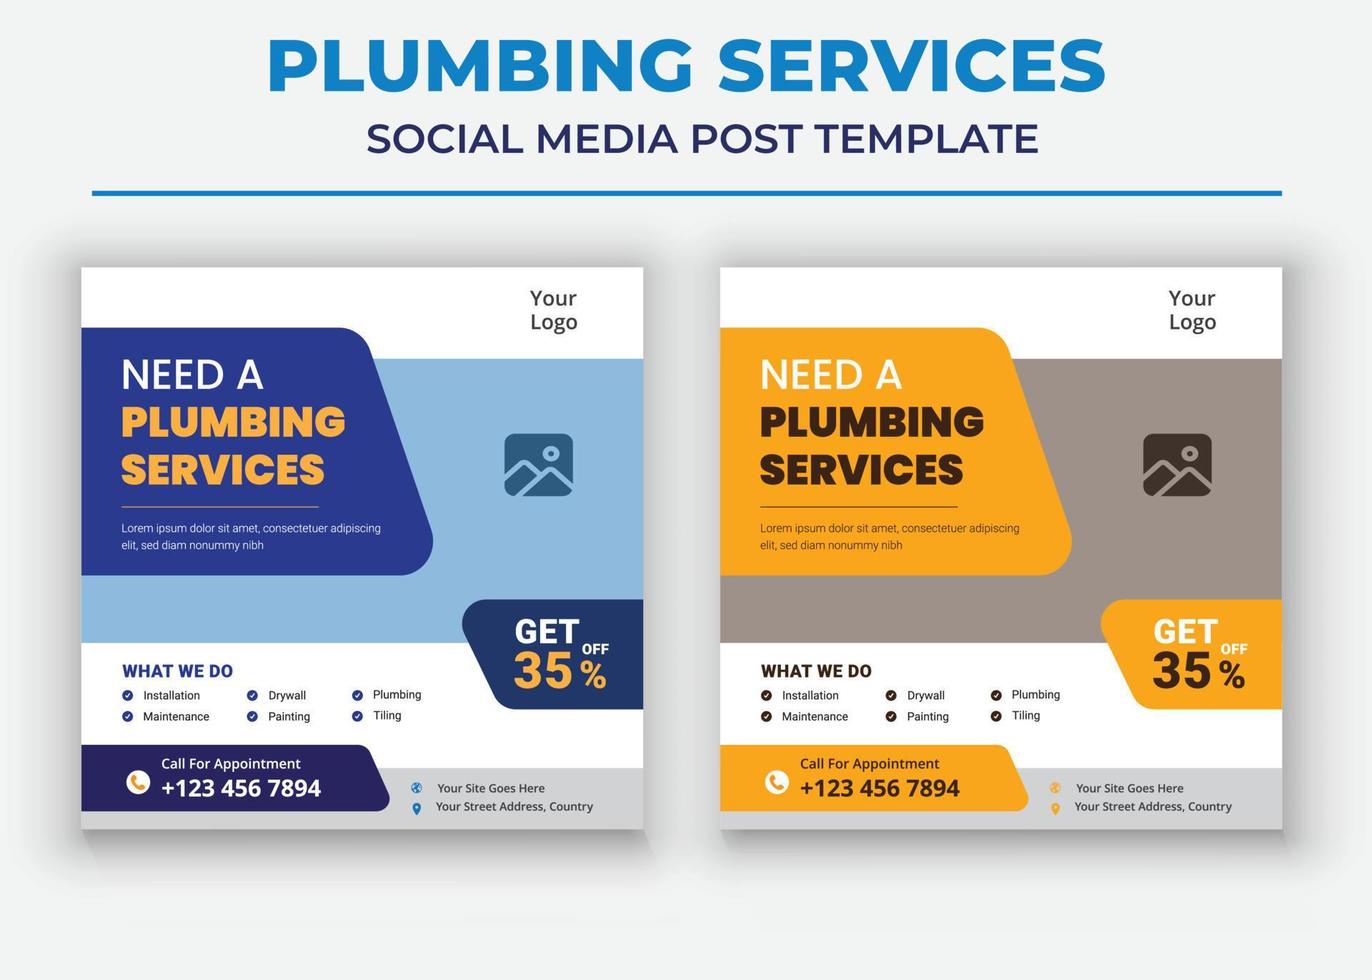 Need A Plumbing Services, Plumber Service Social Media Template vector